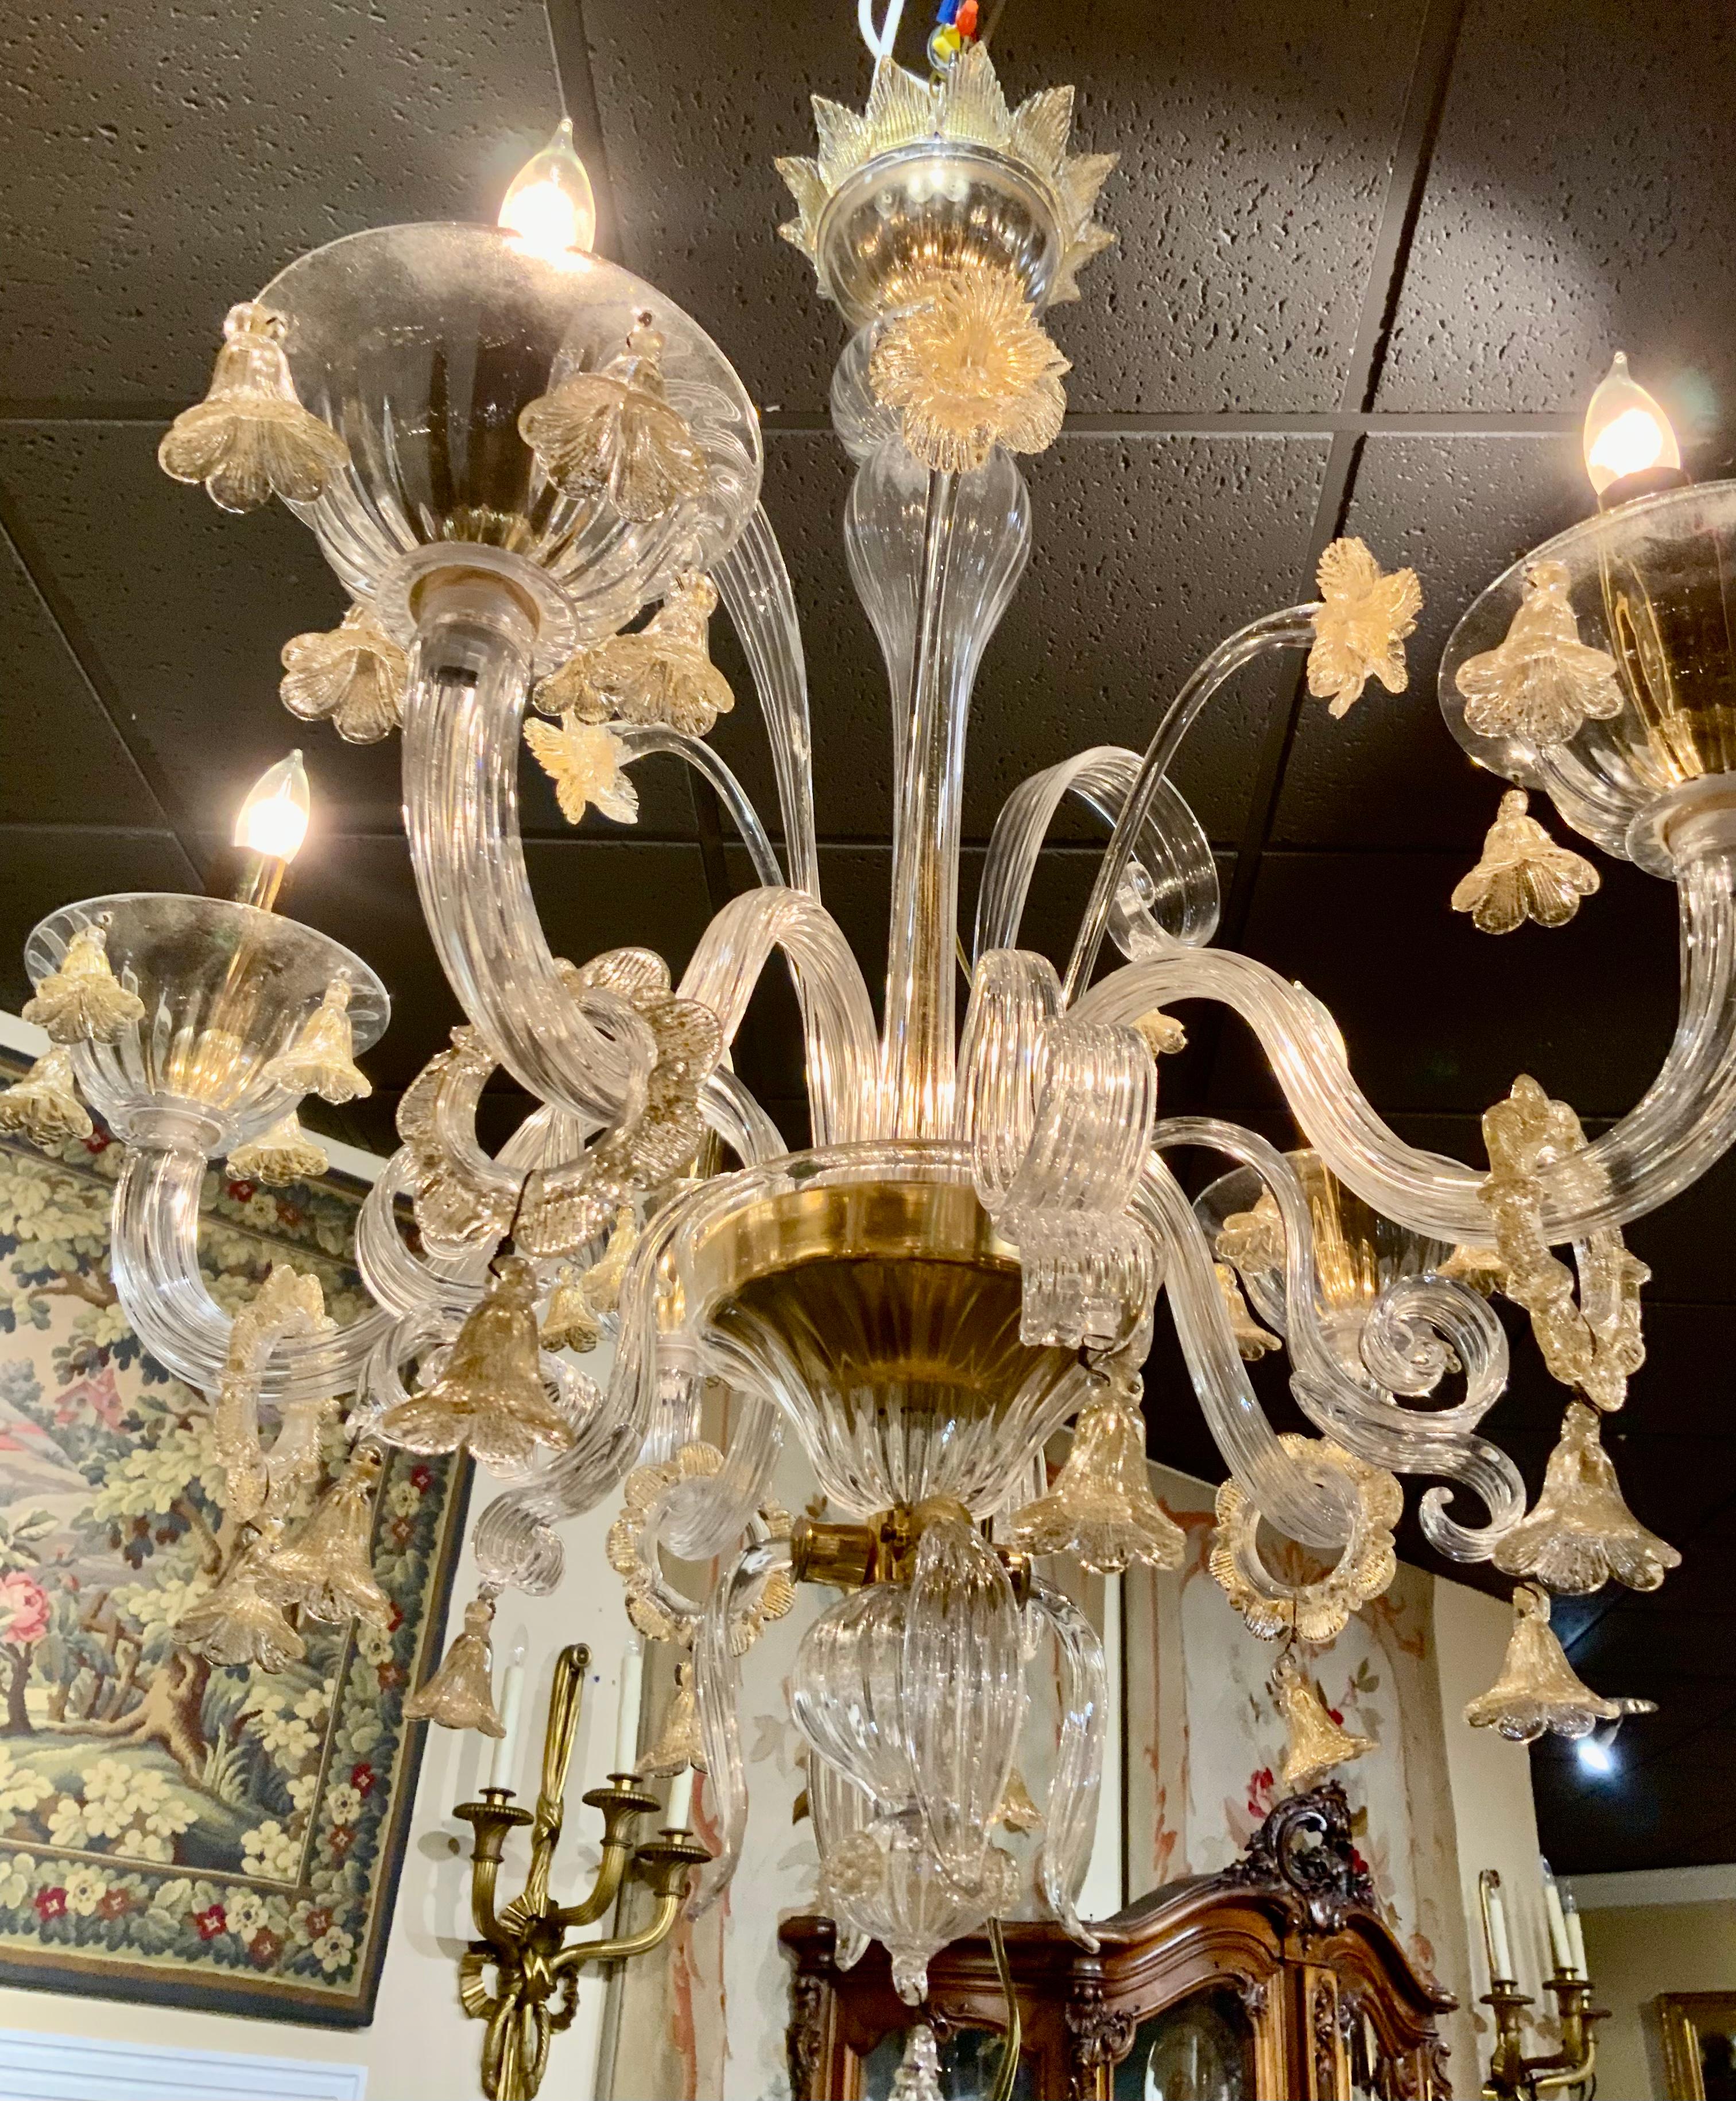 Blown Glass Murano Venetian Style Chandelier with Gold-Flecked Clear Glass, Five Arms